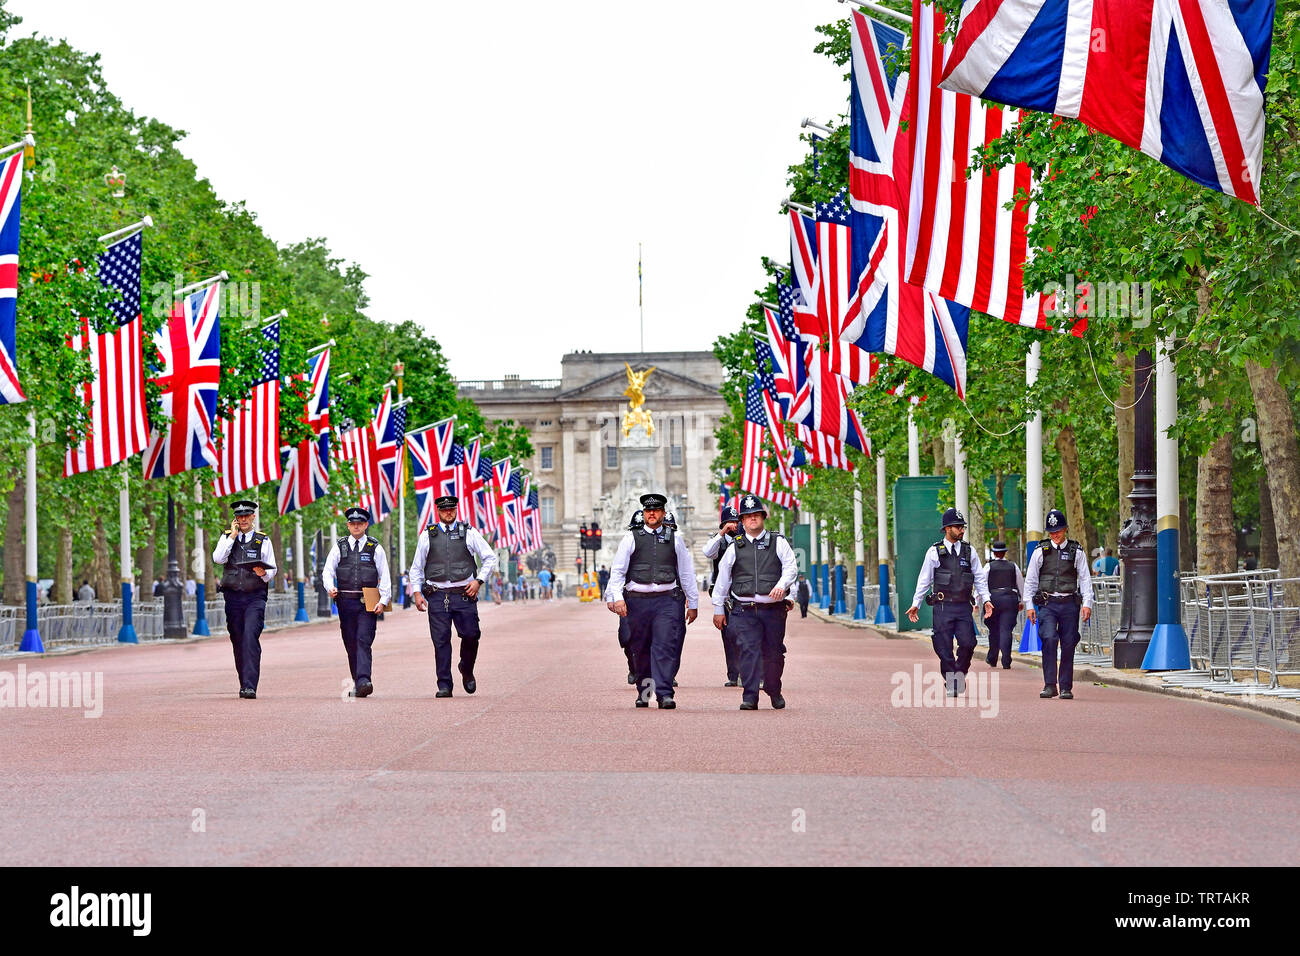 London, England, UK. Metropolitan Police officers on duty around The Mall during Donald Trump's State Visit, 3rd June 2019 Stock Photo